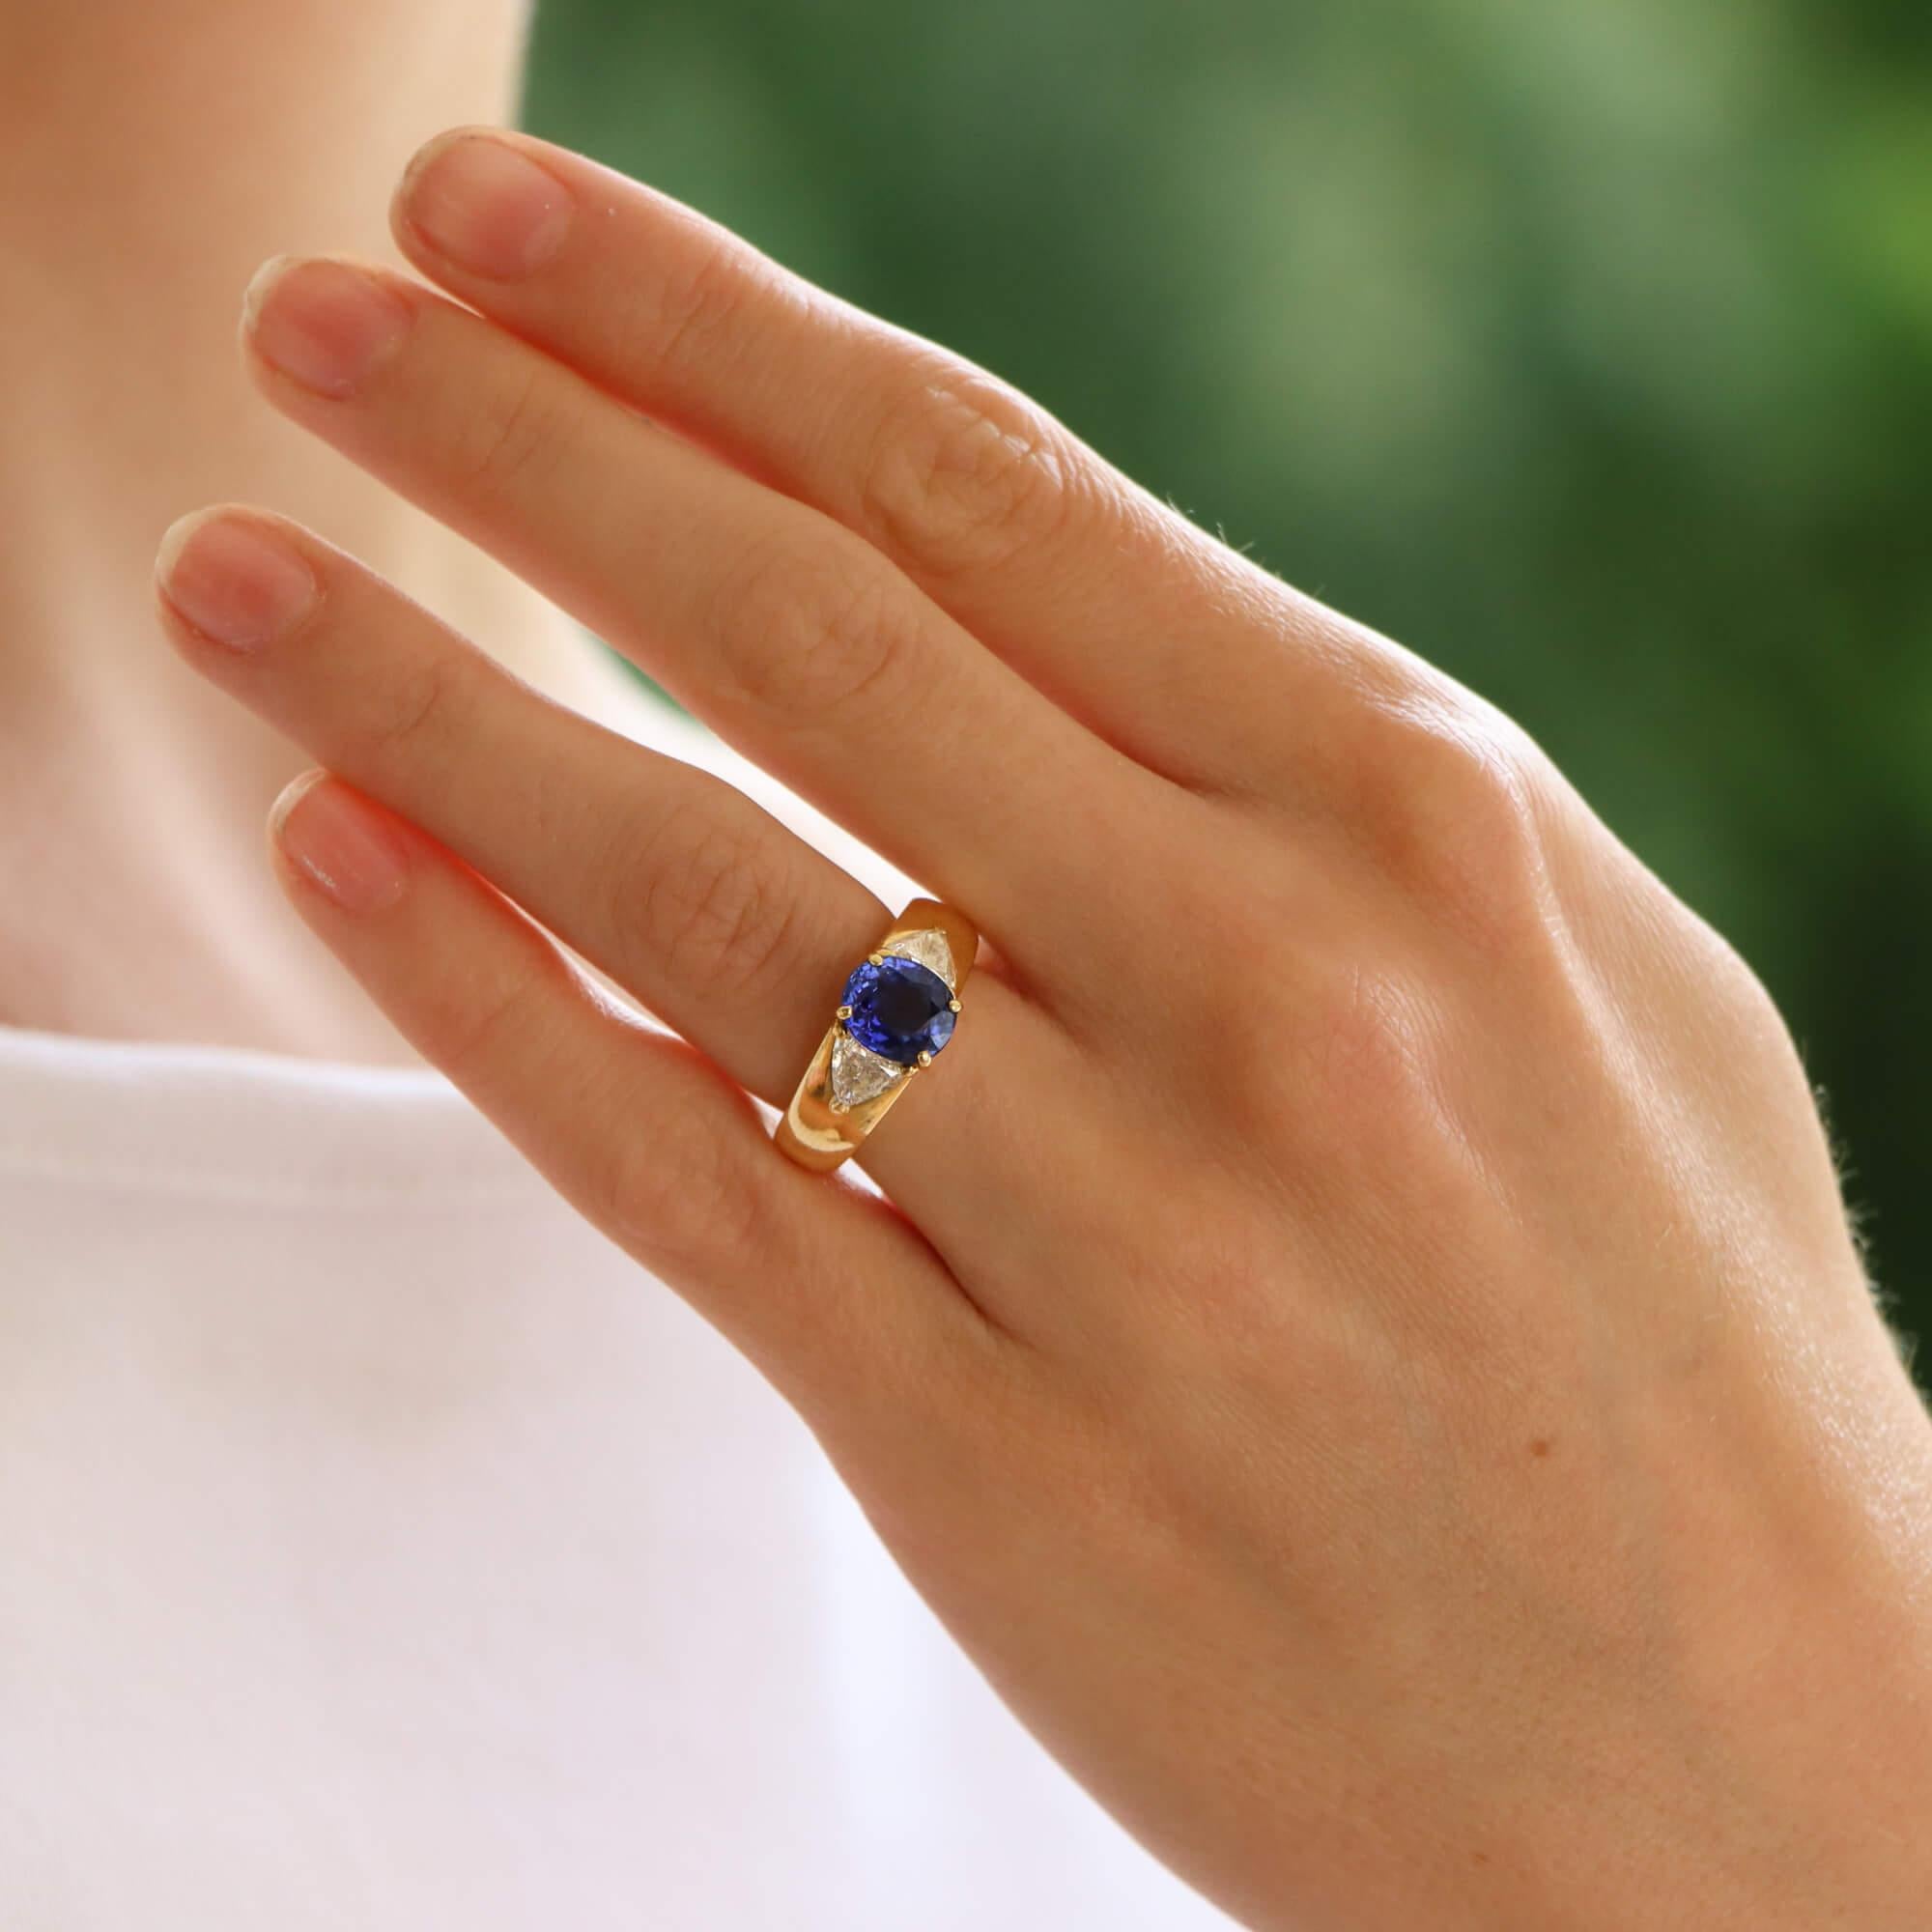 A truly stunning vintage Cartier GIA certified sapphire and diamond three stone ring set in 18k yellow gold.

The ring is centrally set with a beautiful 2.56ct oval cut sapphire which is four claw set in an elegant open back yellow gold setting. To